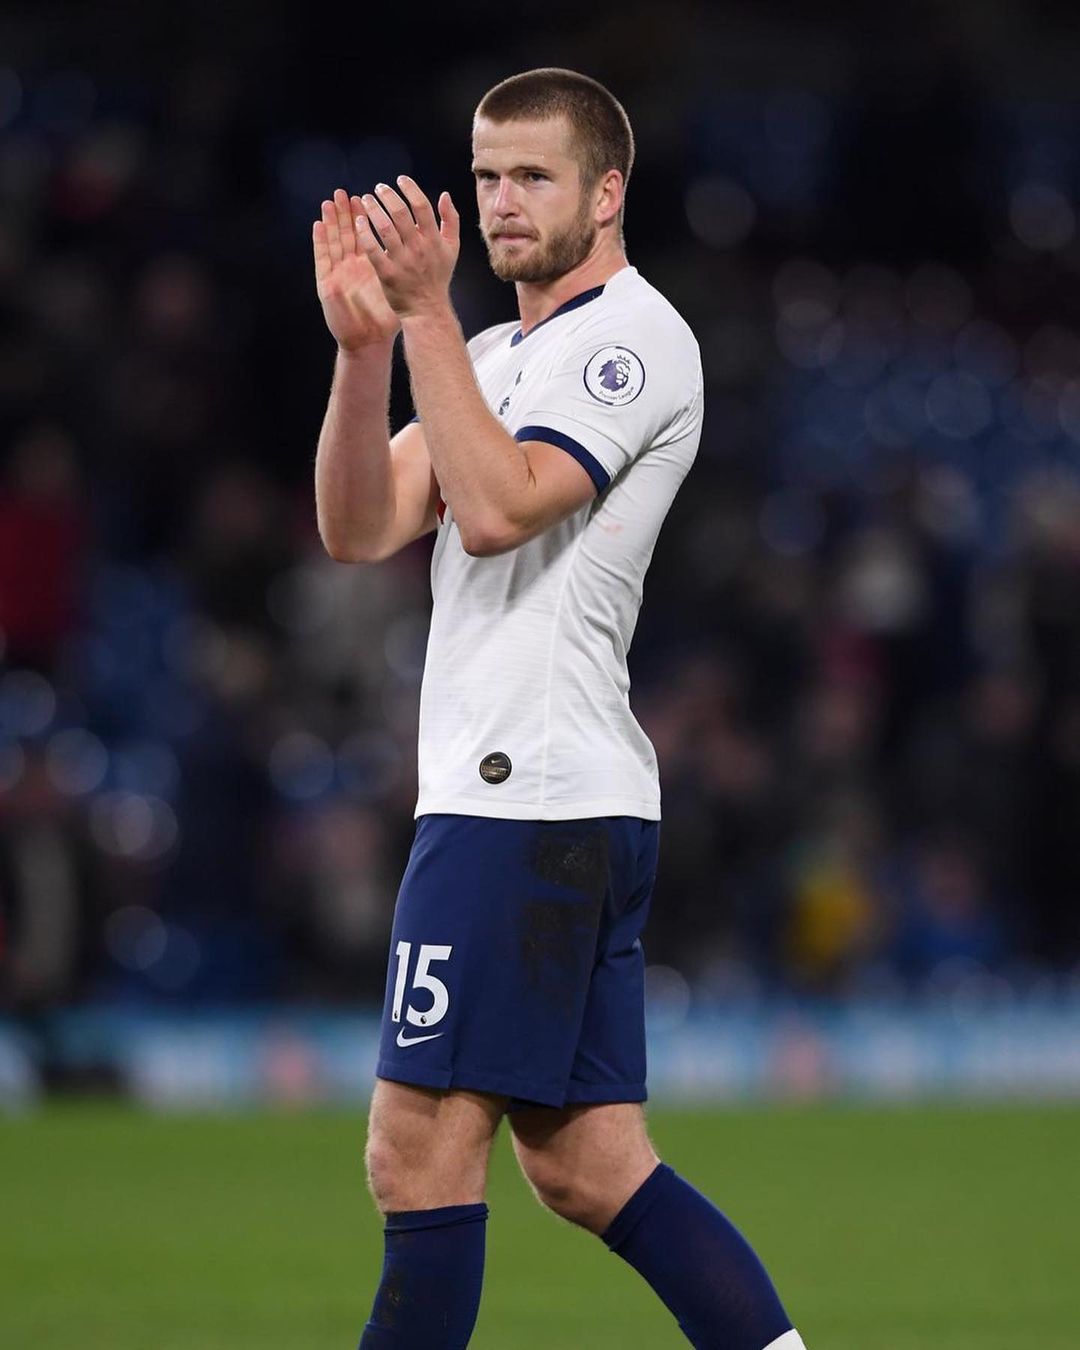 40-health-workers-infected-coronavirus-eric-dier-charged-latest-news-global-world-stories-friday-april-2020-style-rave